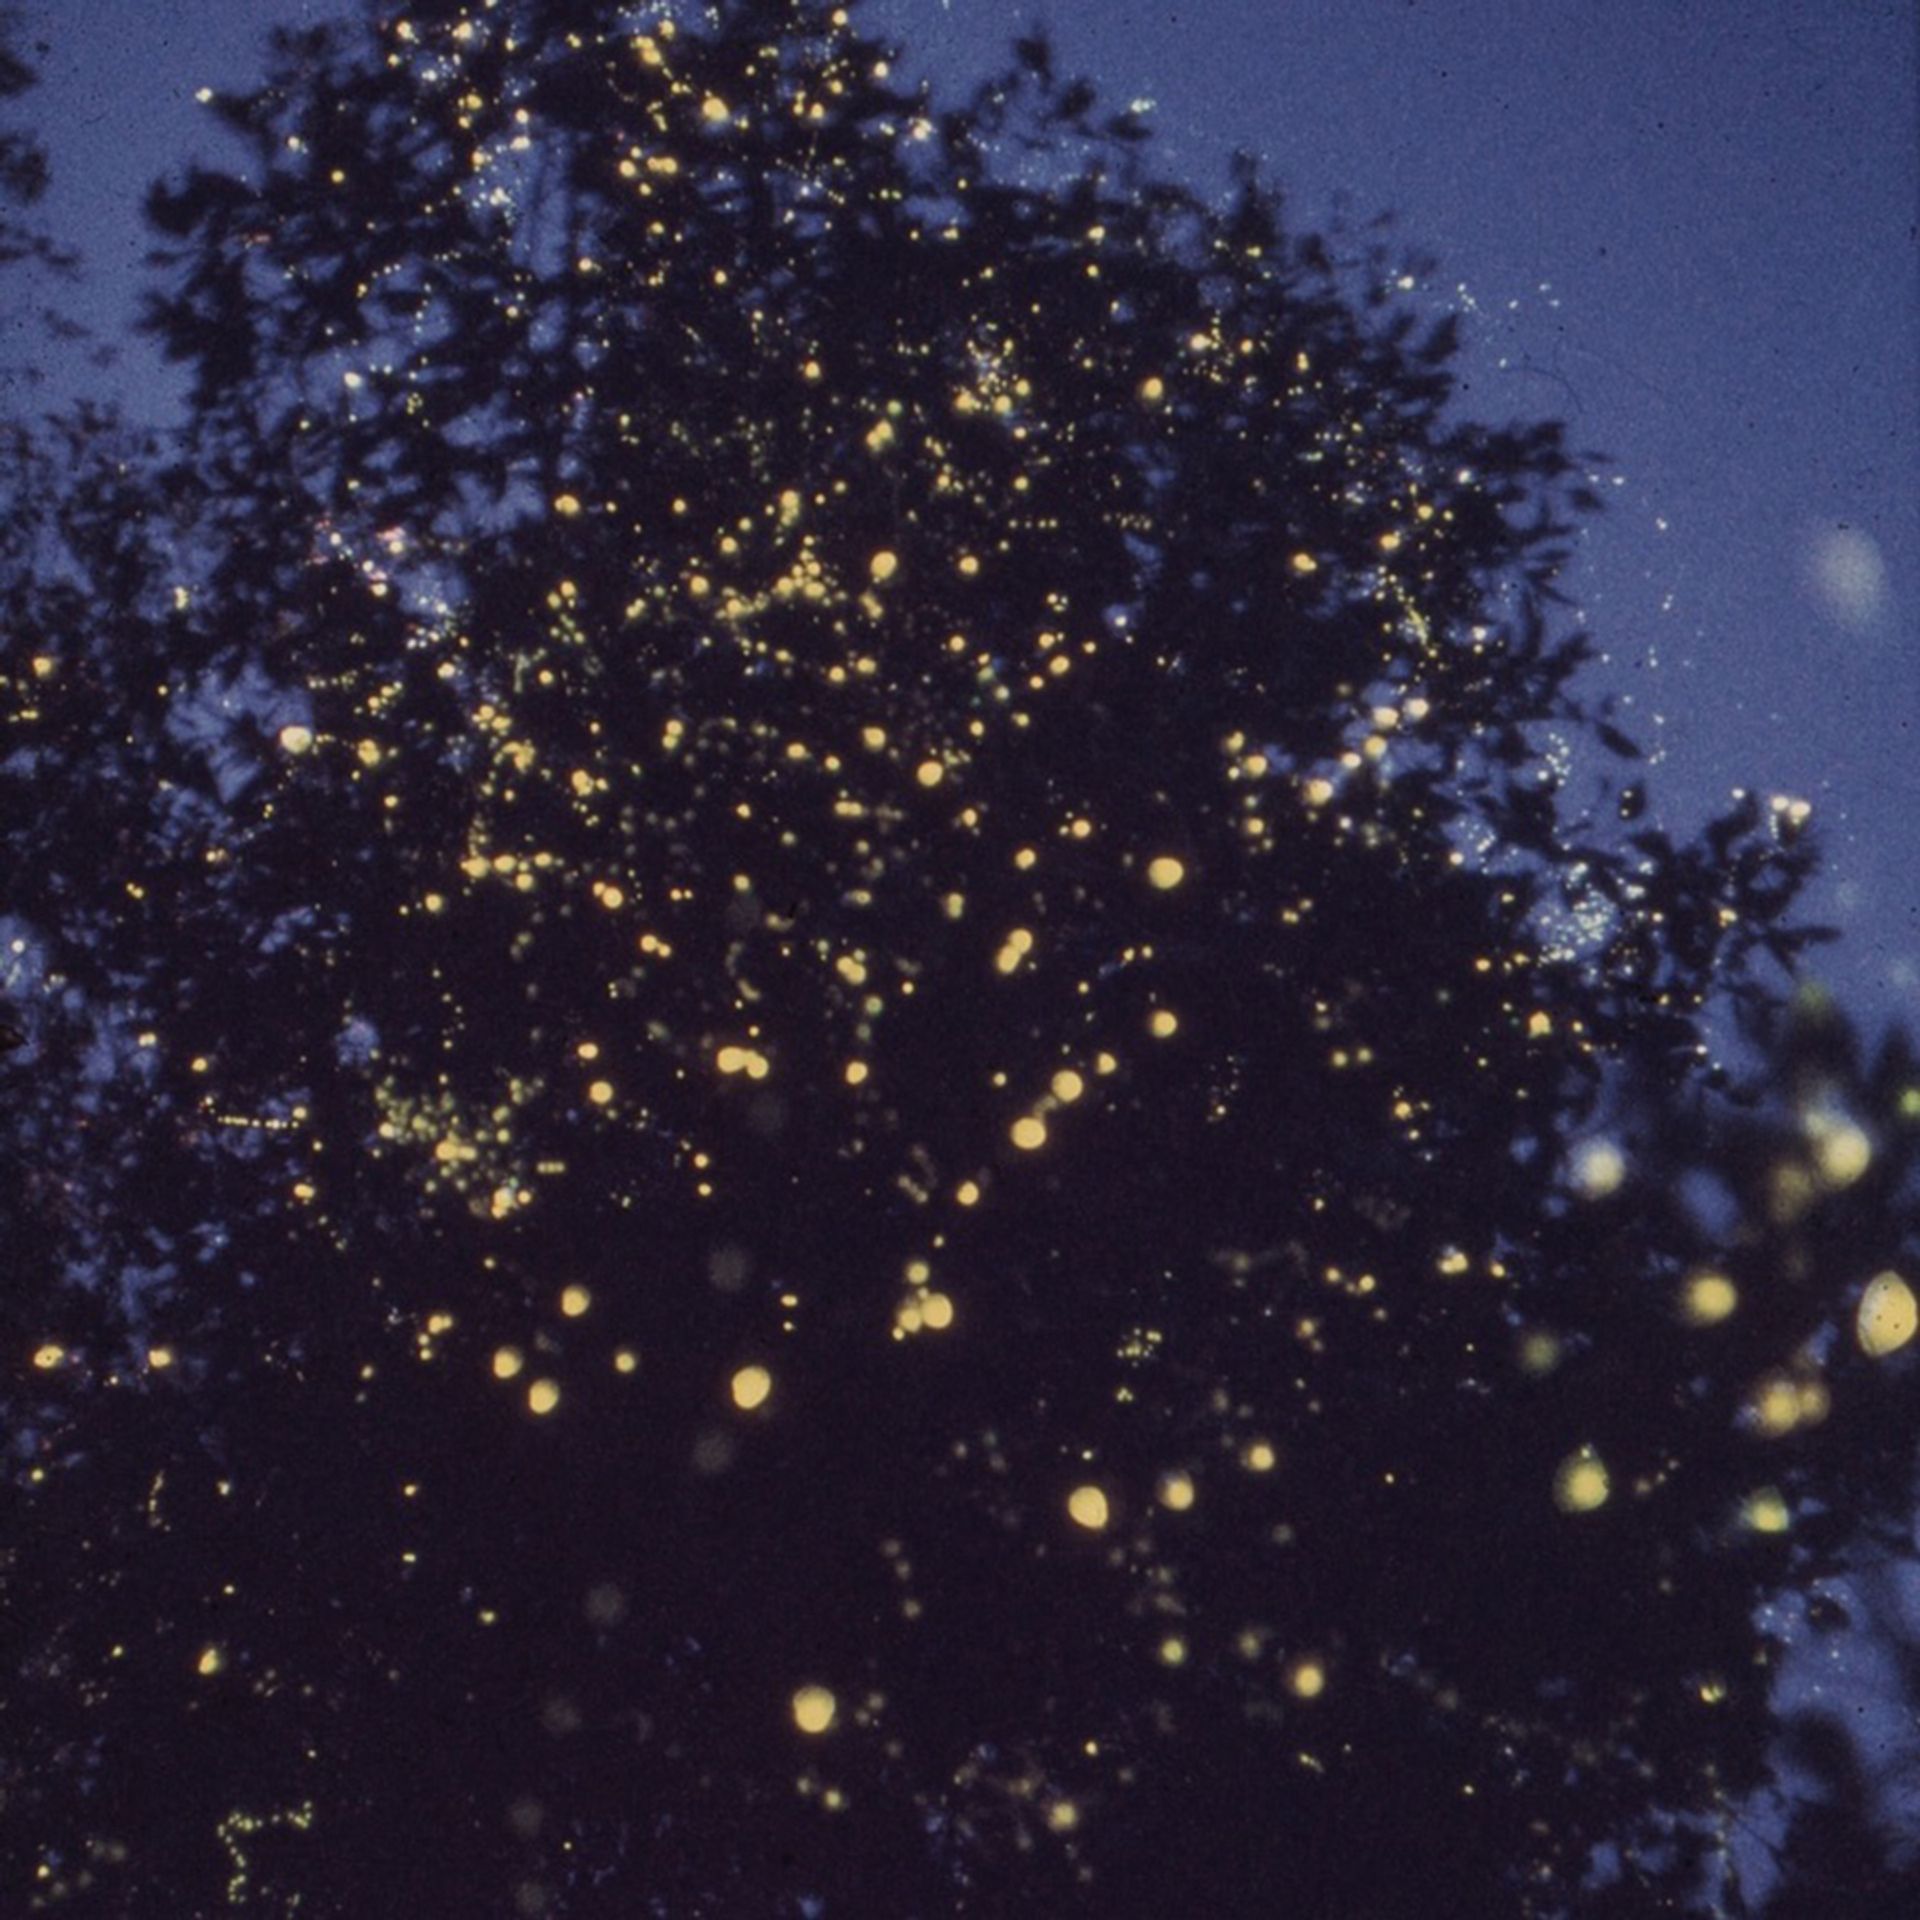 A tree full of Pteroptyx fireflies flashing in unison in the late 1960s. Pteroptyx malaccae used to be common at Kampong Berek on the Choa Chu Kang River. Sadly, the destruction of their habitat eliminated many of the sites where fireflies used to be found in abundance.